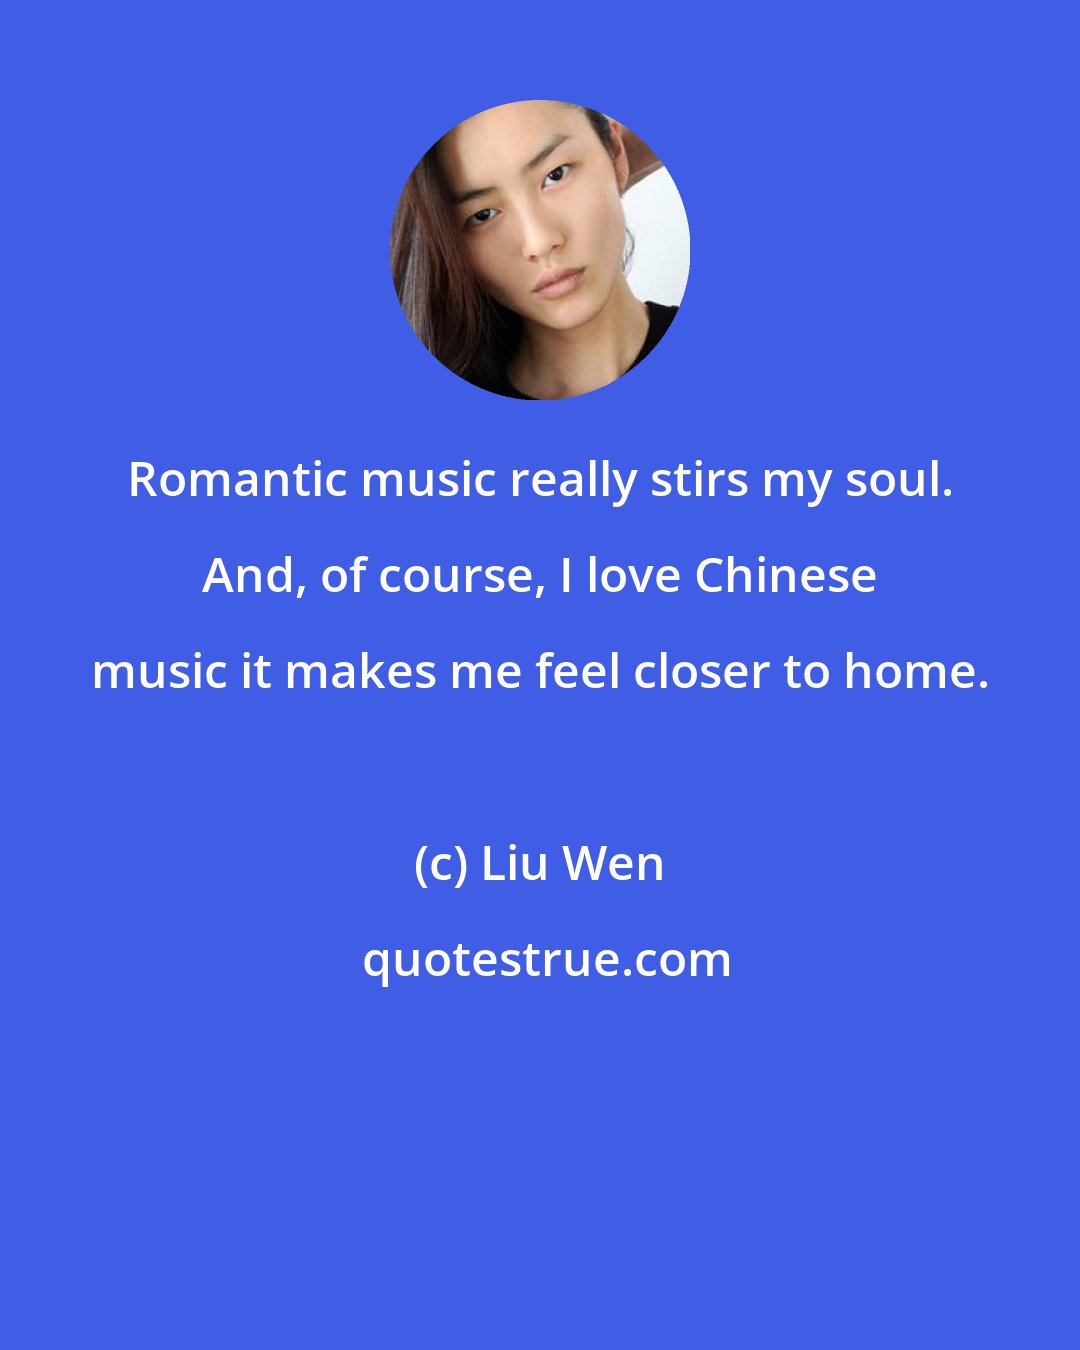 Liu Wen: Romantic music really stirs my soul. And, of course, I love Chinese music it makes me feel closer to home.